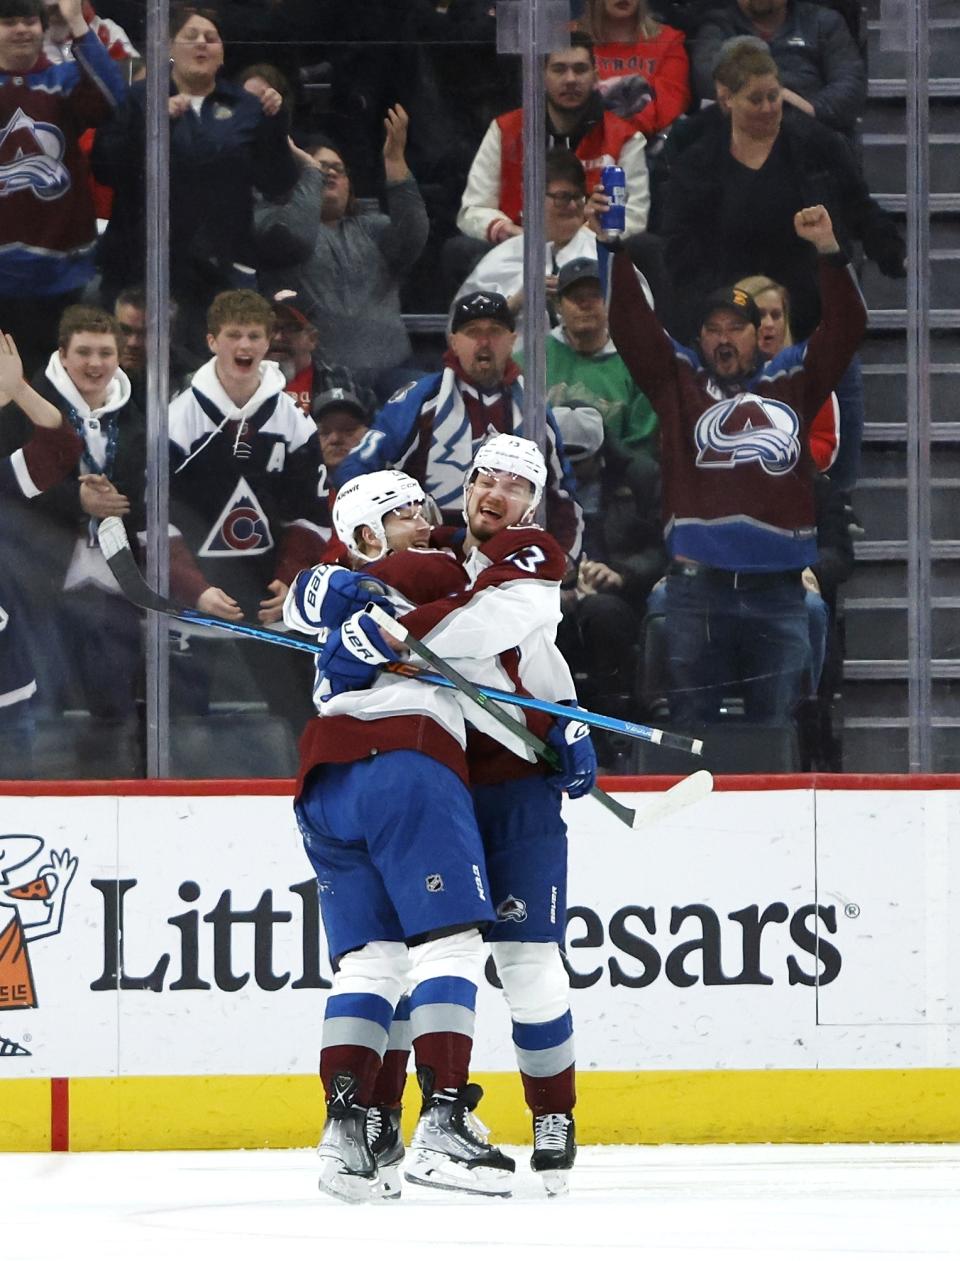 Colorado Avalanche center Lars Eller, left, celebrates his third period goal against the Detroit Red Wings with right wing Valeri Nichushkin during an NHL hockey game Saturday, March 18, 2023, in Detroit. (AP Photo/Duane Burleson)